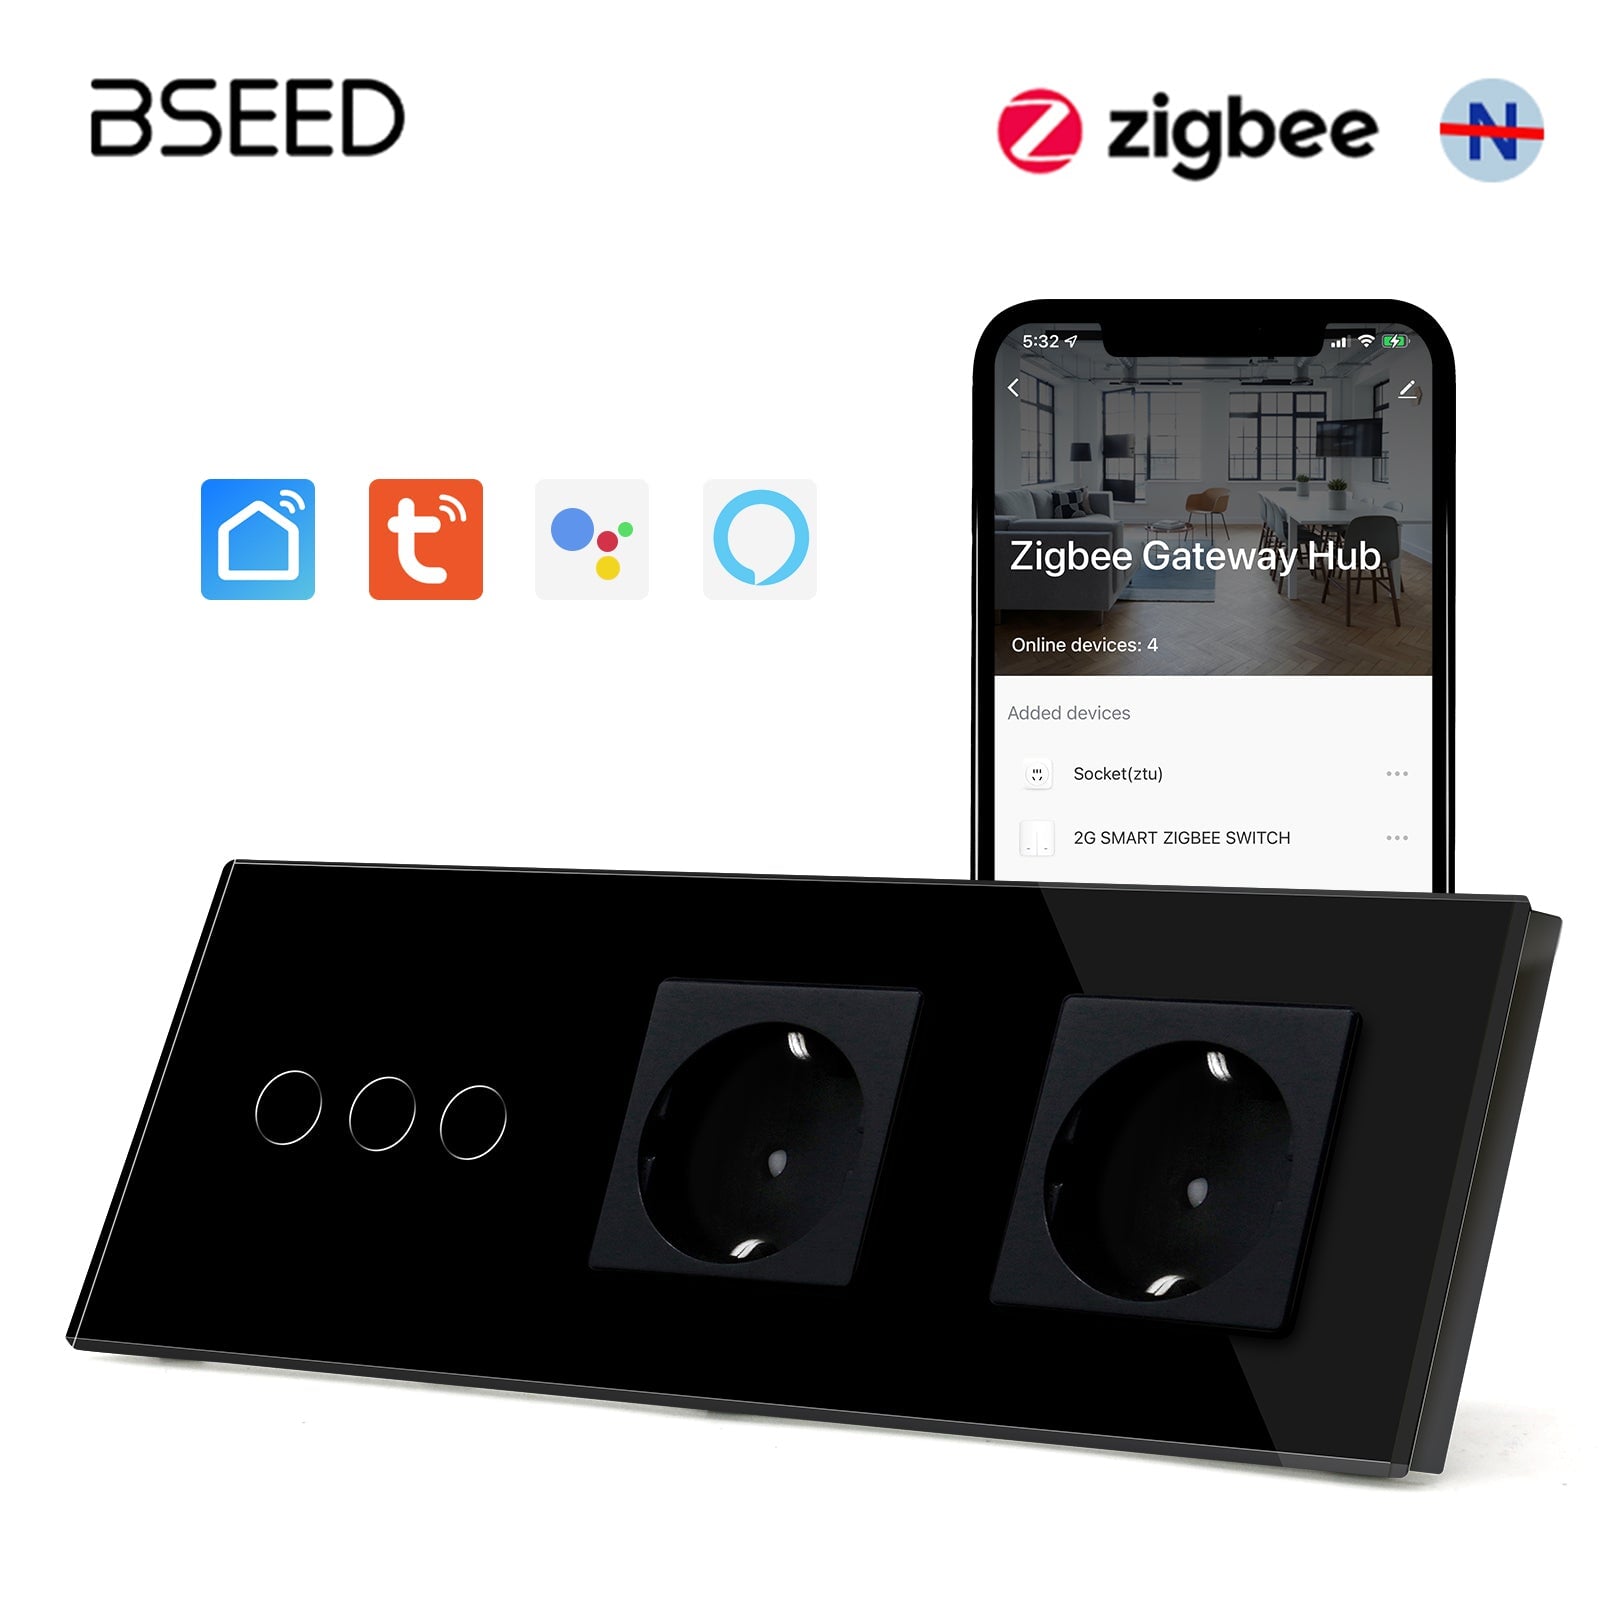 Bseed Zigbee Touch 1/2/3 Gang Light Switches Single Live Line Multi Control With Double EU Standard Not Smart Wall Sockets Light Switches Bseedswitch Black 3Gang 